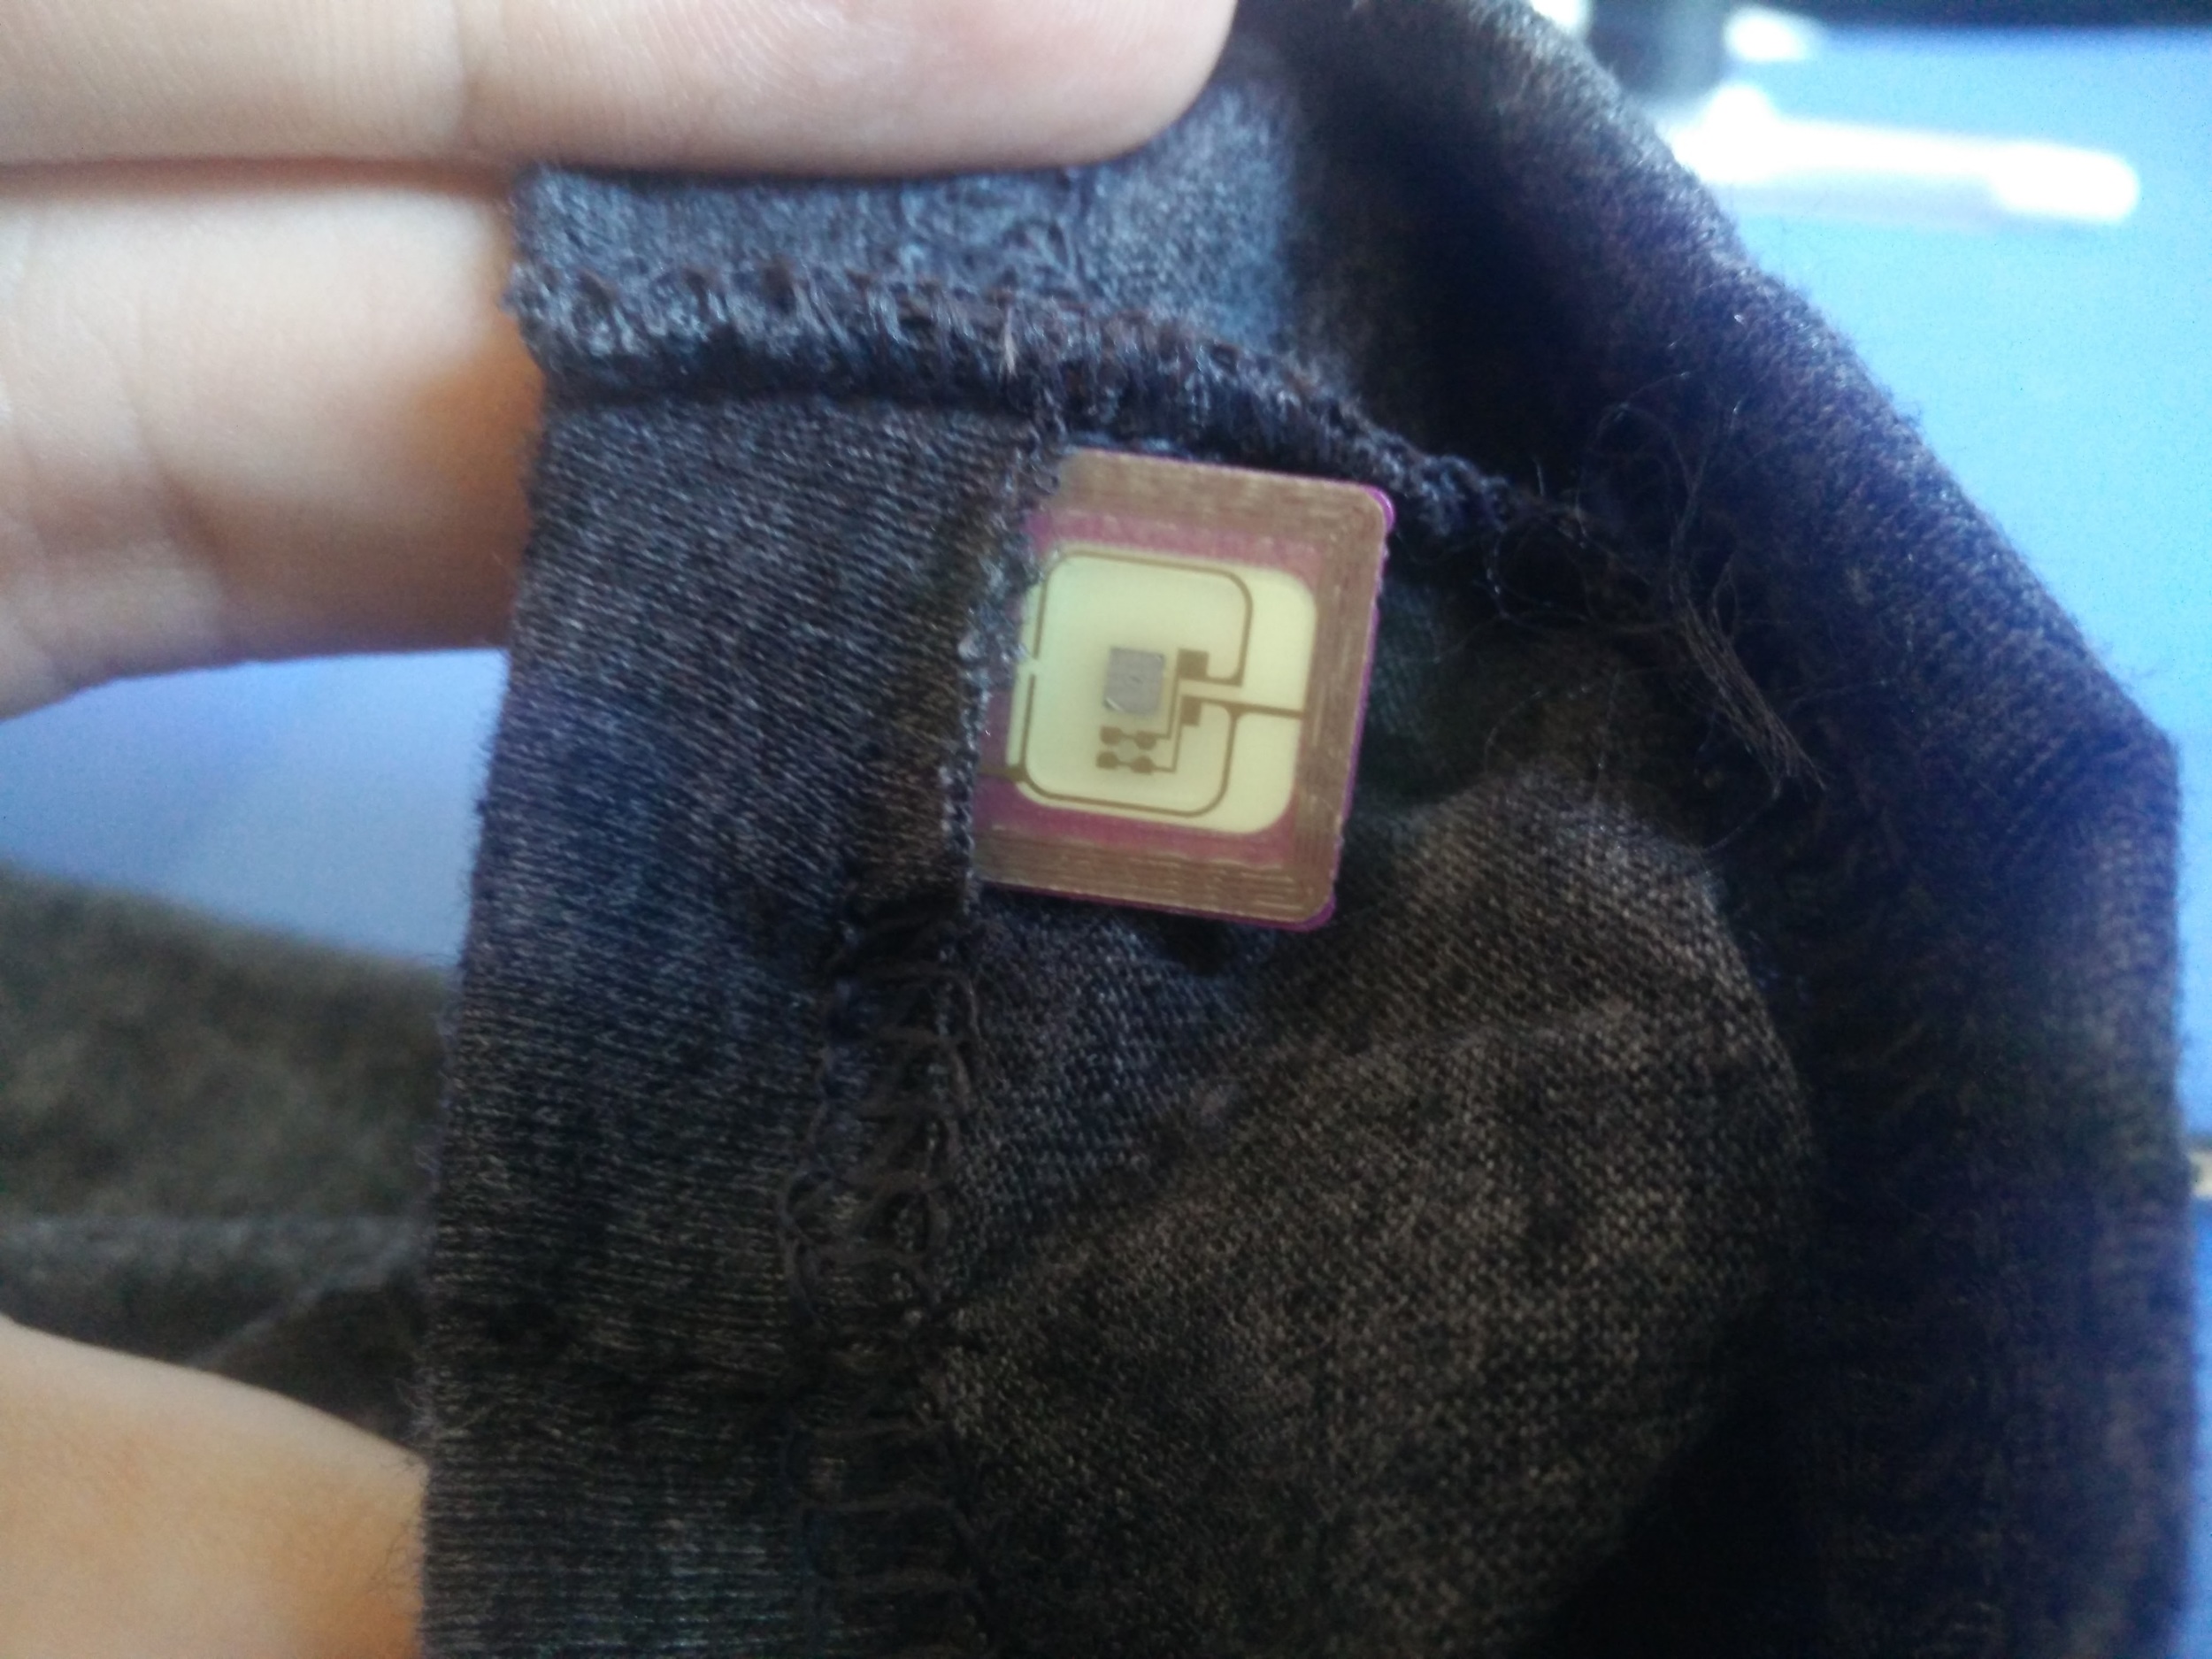 How to add contactless payment to your clothes